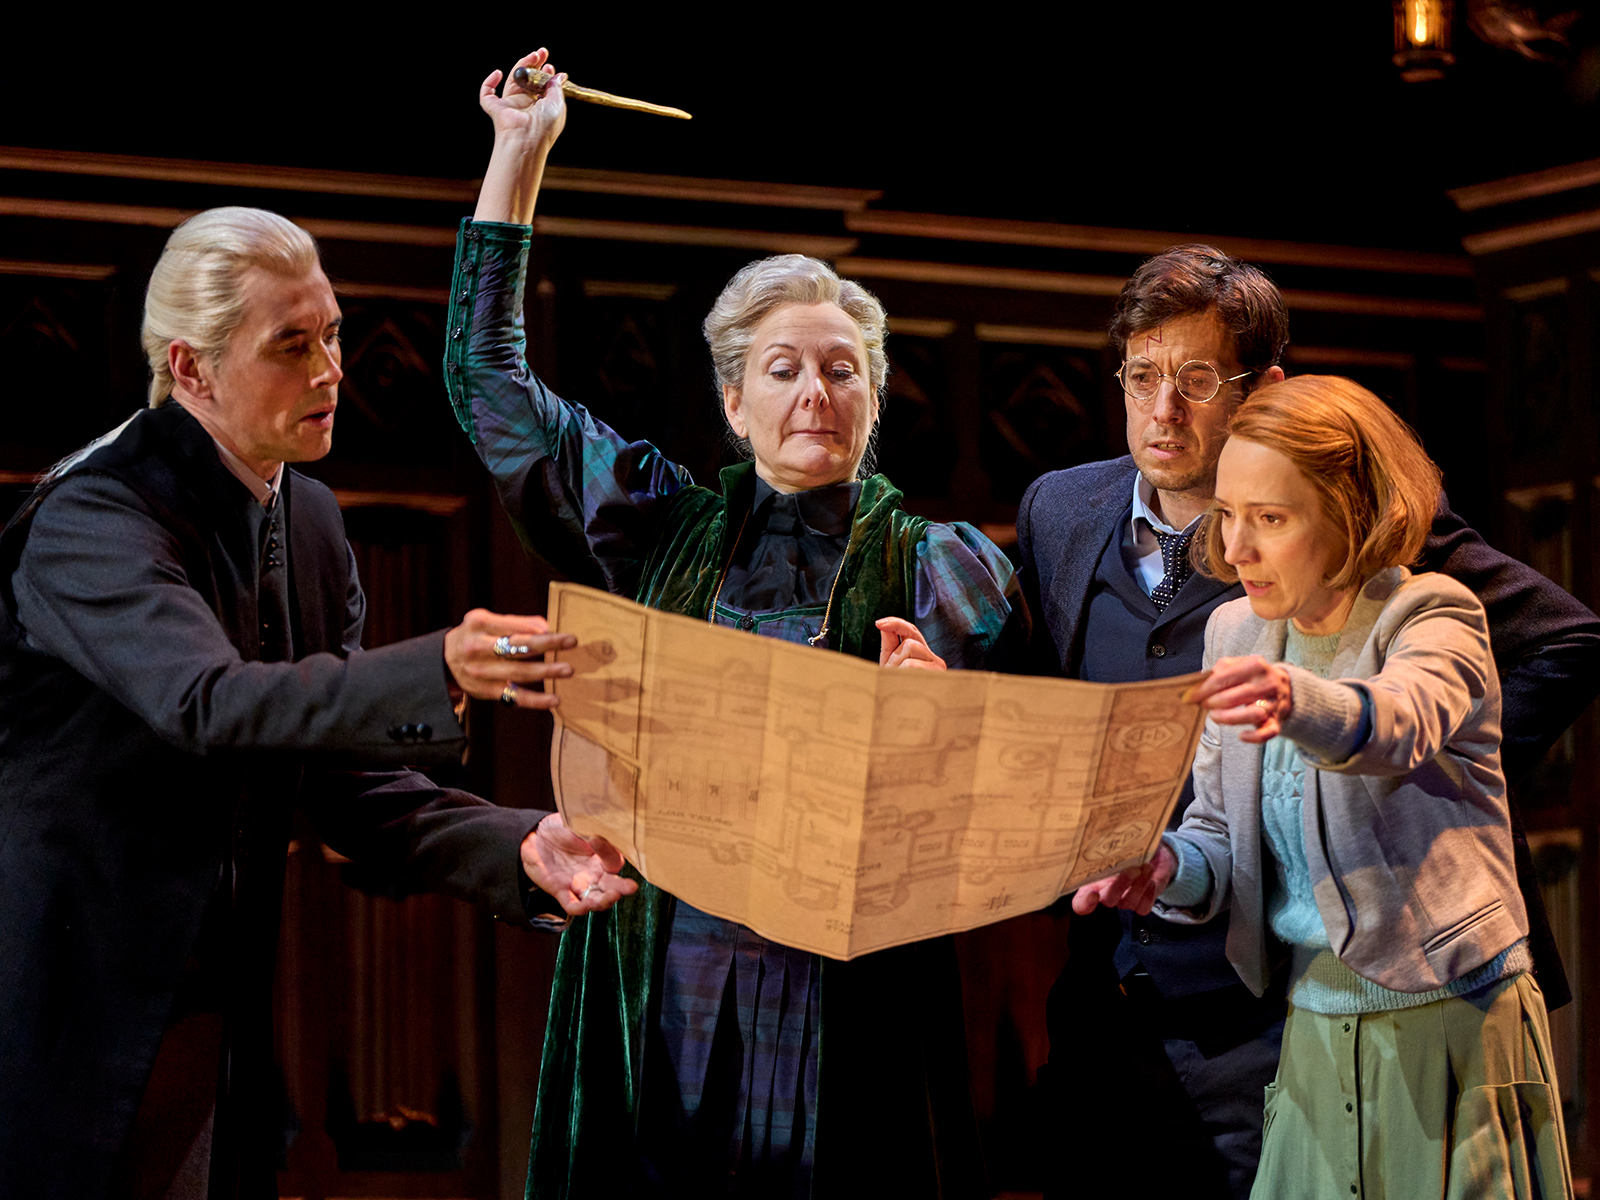 Harry Potter And The Cursed Child: Both Parts photo from the show